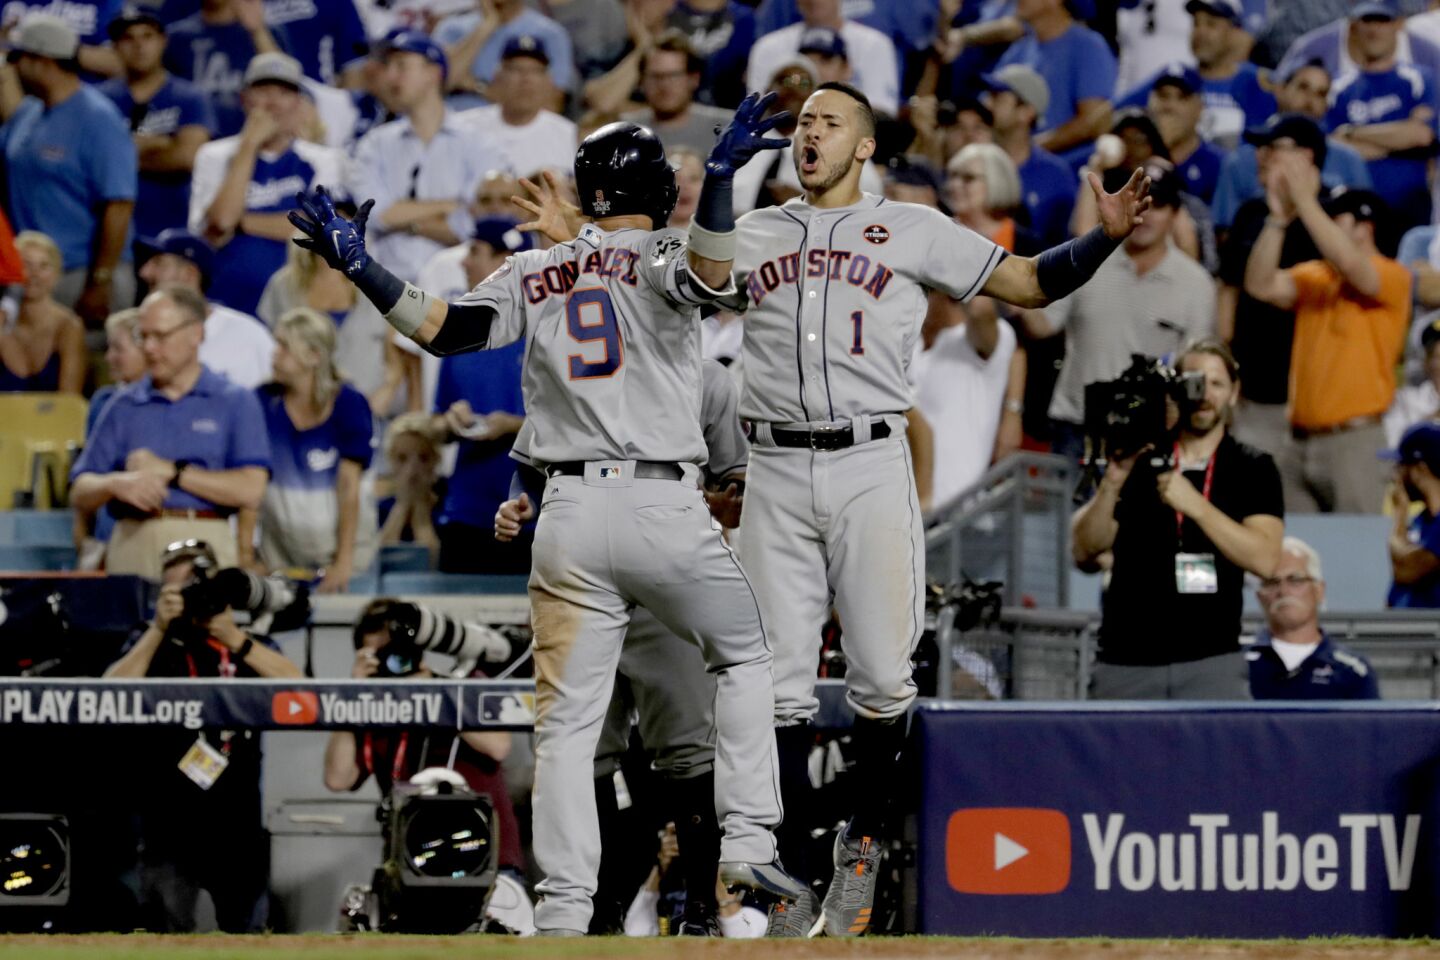 Astros shortstop Carlos Correa greets teammate Marwin Gonzalez after he hit a solo home run off Dodgers closer Kenley Jansen in the ninth inning to tie the score, 3-3, and force extra innings.